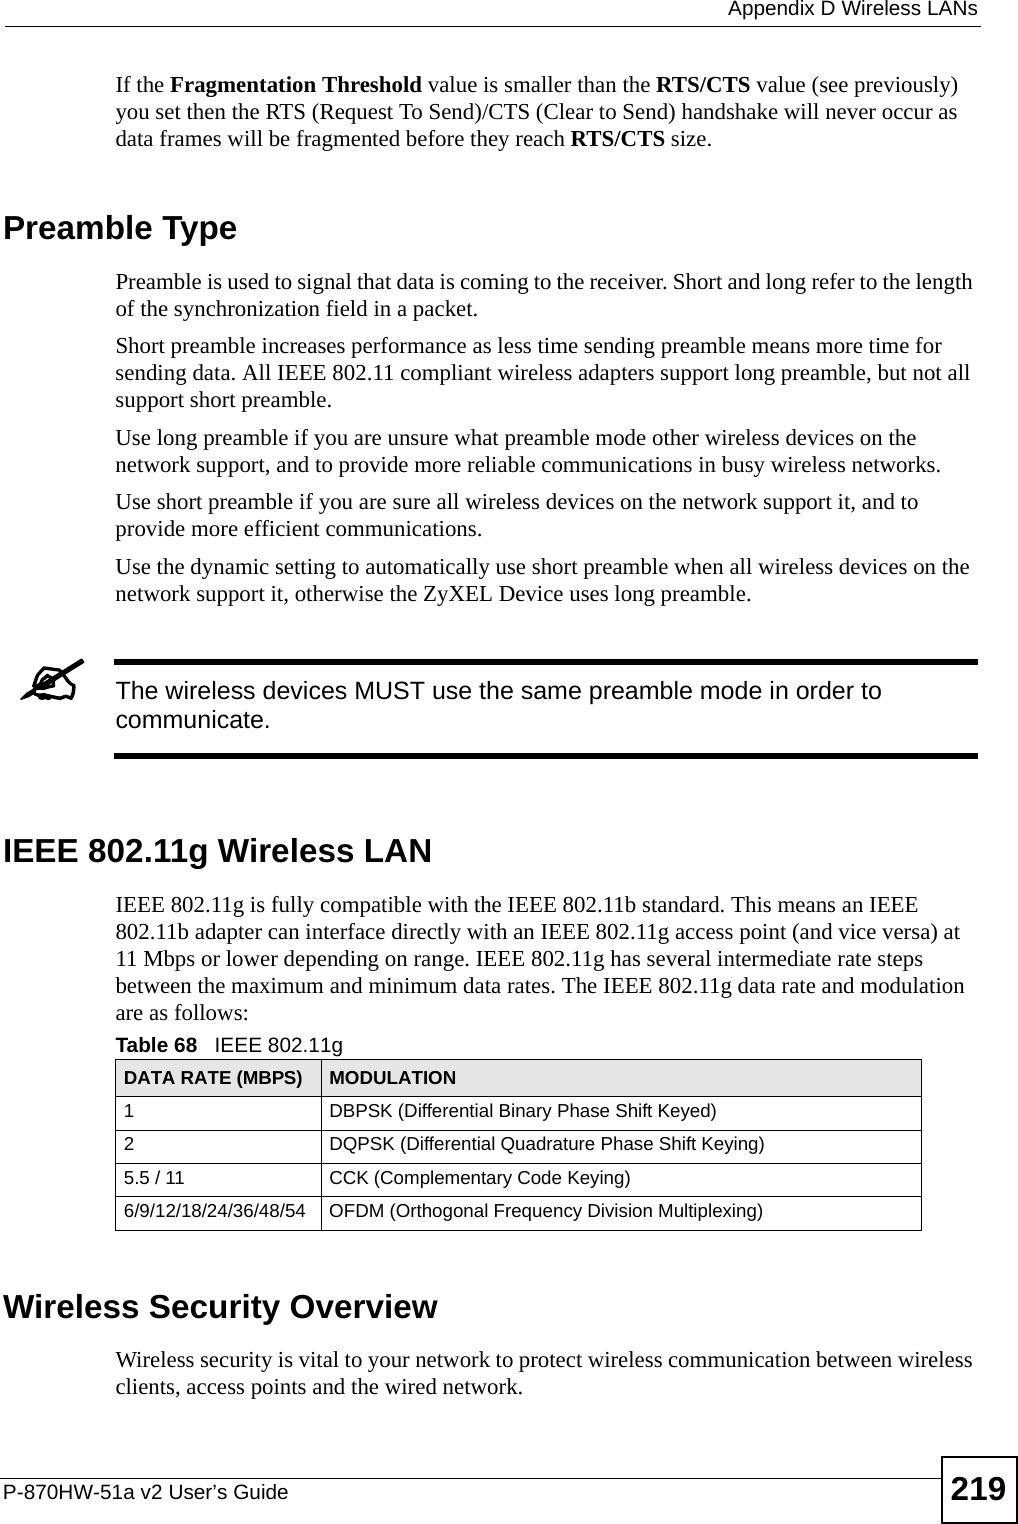  Appendix D Wireless LANsP-870HW-51a v2 User’s Guide 219If the Fragmentation Threshold value is smaller than the RTS/CTS value (see previously) you set then the RTS (Request To Send)/CTS (Clear to Send) handshake will never occur as data frames will be fragmented before they reach RTS/CTS size.Preamble TypePreamble is used to signal that data is coming to the receiver. Short and long refer to the length of the synchronization field in a packet.Short preamble increases performance as less time sending preamble means more time for sending data. All IEEE 802.11 compliant wireless adapters support long preamble, but not all support short preamble. Use long preamble if you are unsure what preamble mode other wireless devices on the network support, and to provide more reliable communications in busy wireless networks. Use short preamble if you are sure all wireless devices on the network support it, and to provide more efficient communications.Use the dynamic setting to automatically use short preamble when all wireless devices on the network support it, otherwise the ZyXEL Device uses long preamble.&quot;The wireless devices MUST use the same preamble mode in order to communicate.IEEE 802.11g Wireless LANIEEE 802.11g is fully compatible with the IEEE 802.11b standard. This means an IEEE 802.11b adapter can interface directly with an IEEE 802.11g access point (and vice versa) at 11 Mbps or lower depending on range. IEEE 802.11g has several intermediate rate steps between the maximum and minimum data rates. The IEEE 802.11g data rate and modulation are as follows:Wireless Security OverviewWireless security is vital to your network to protect wireless communication between wireless clients, access points and the wired network.Table 68   IEEE 802.11gDATA RATE (MBPS) MODULATION1 DBPSK (Differential Binary Phase Shift Keyed)2 DQPSK (Differential Quadrature Phase Shift Keying)5.5 / 11 CCK (Complementary Code Keying) 6/9/12/18/24/36/48/54 OFDM (Orthogonal Frequency Division Multiplexing) 